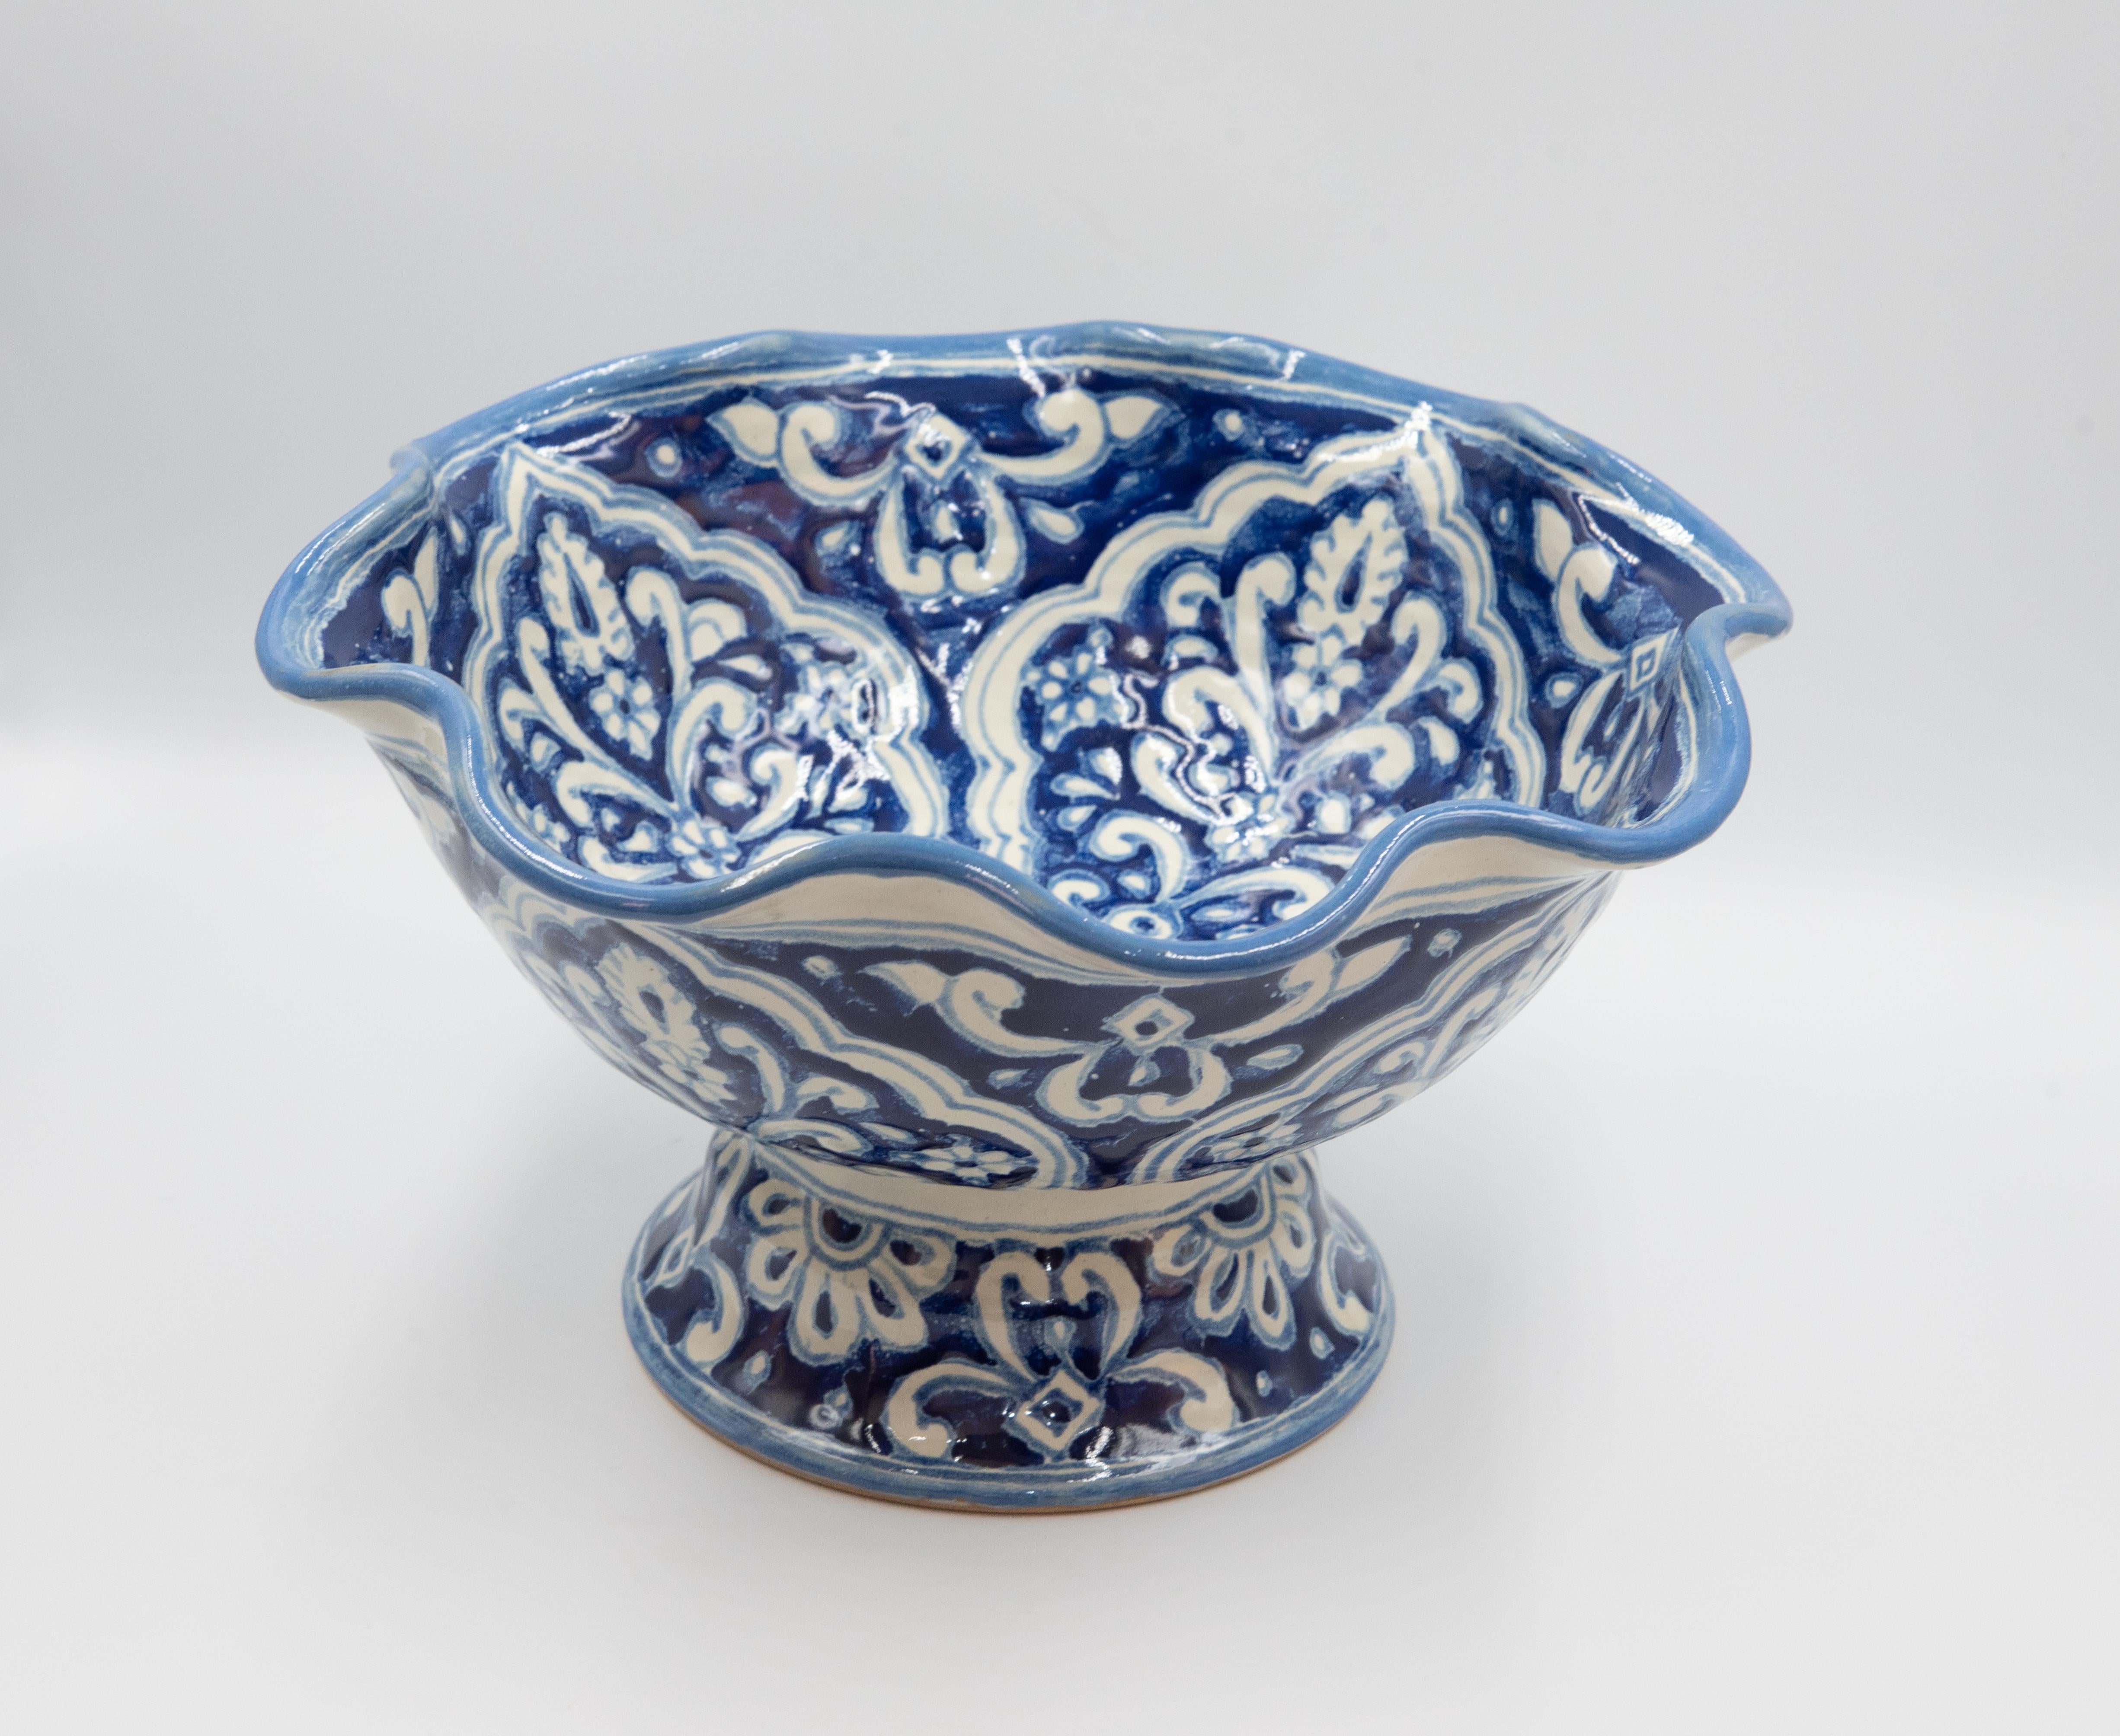 This beautiful Talavera fruit bowl is part of Cesar Torres's traditional work series, using mainly blue and white from traditional Talavera. 

The Talavera is not just a simple painted ceramic: its exquisite decoration is the product of a delicate